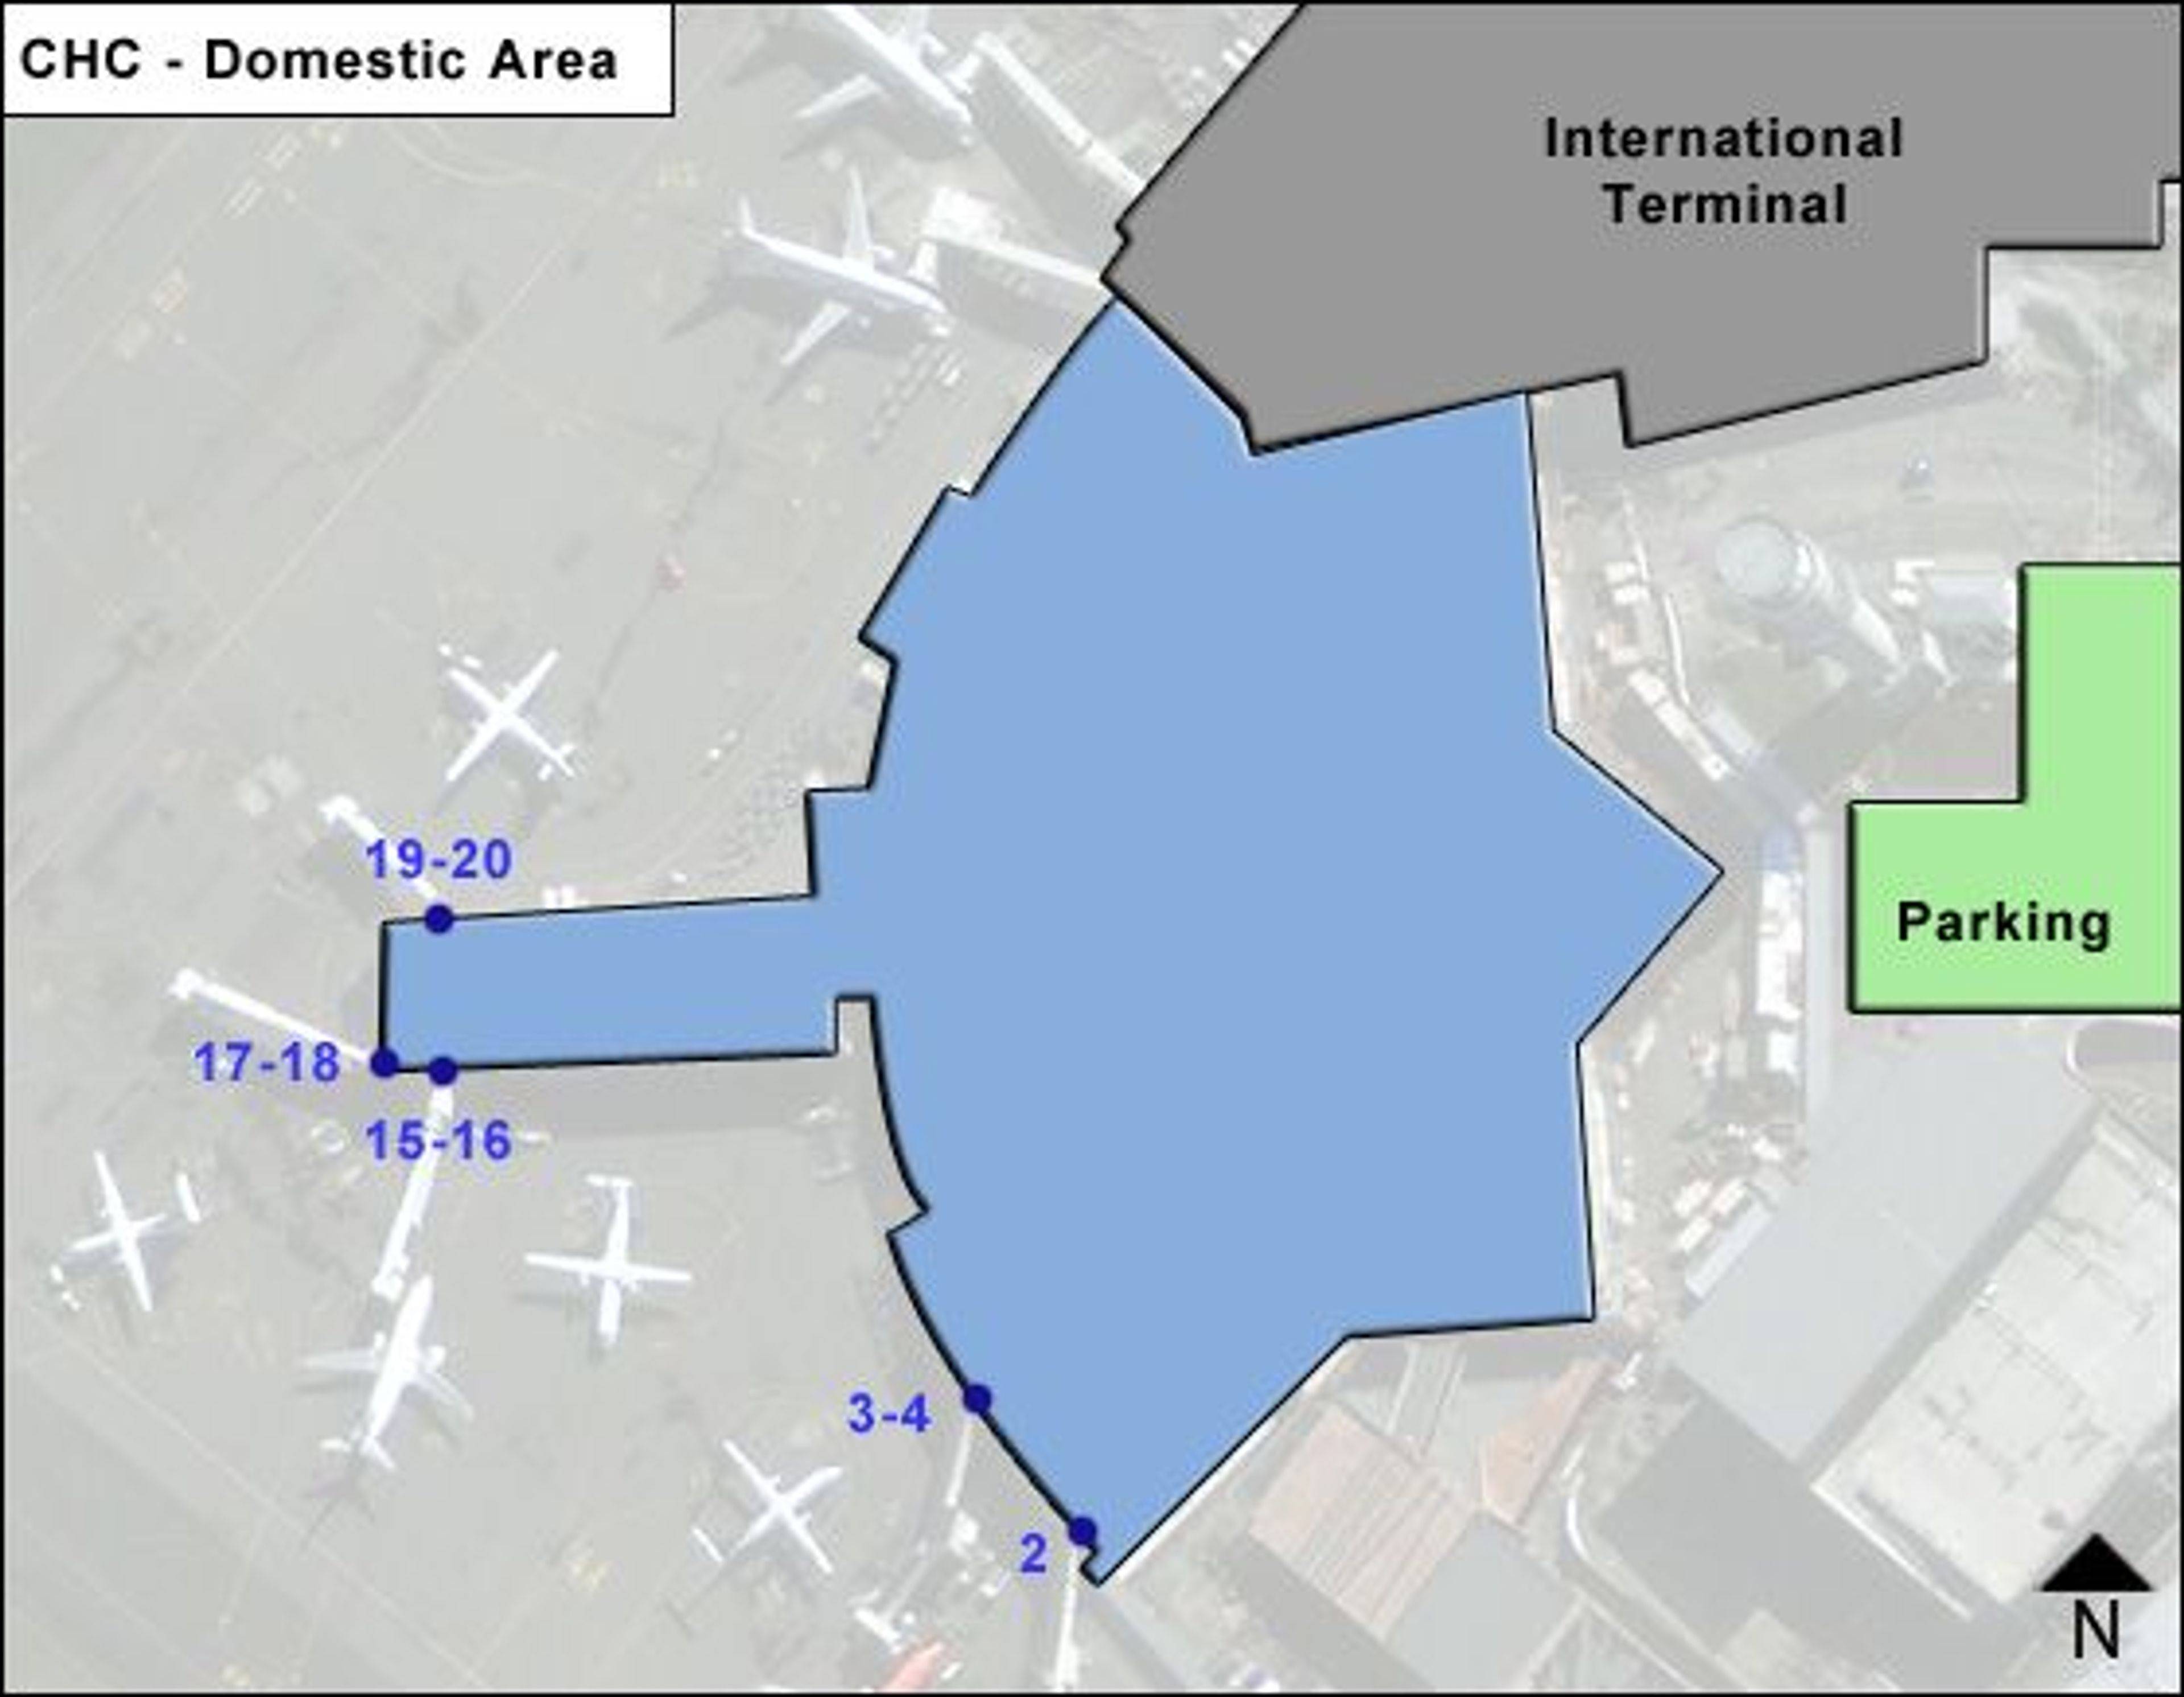 Christchurch Airport Domestic Area Map